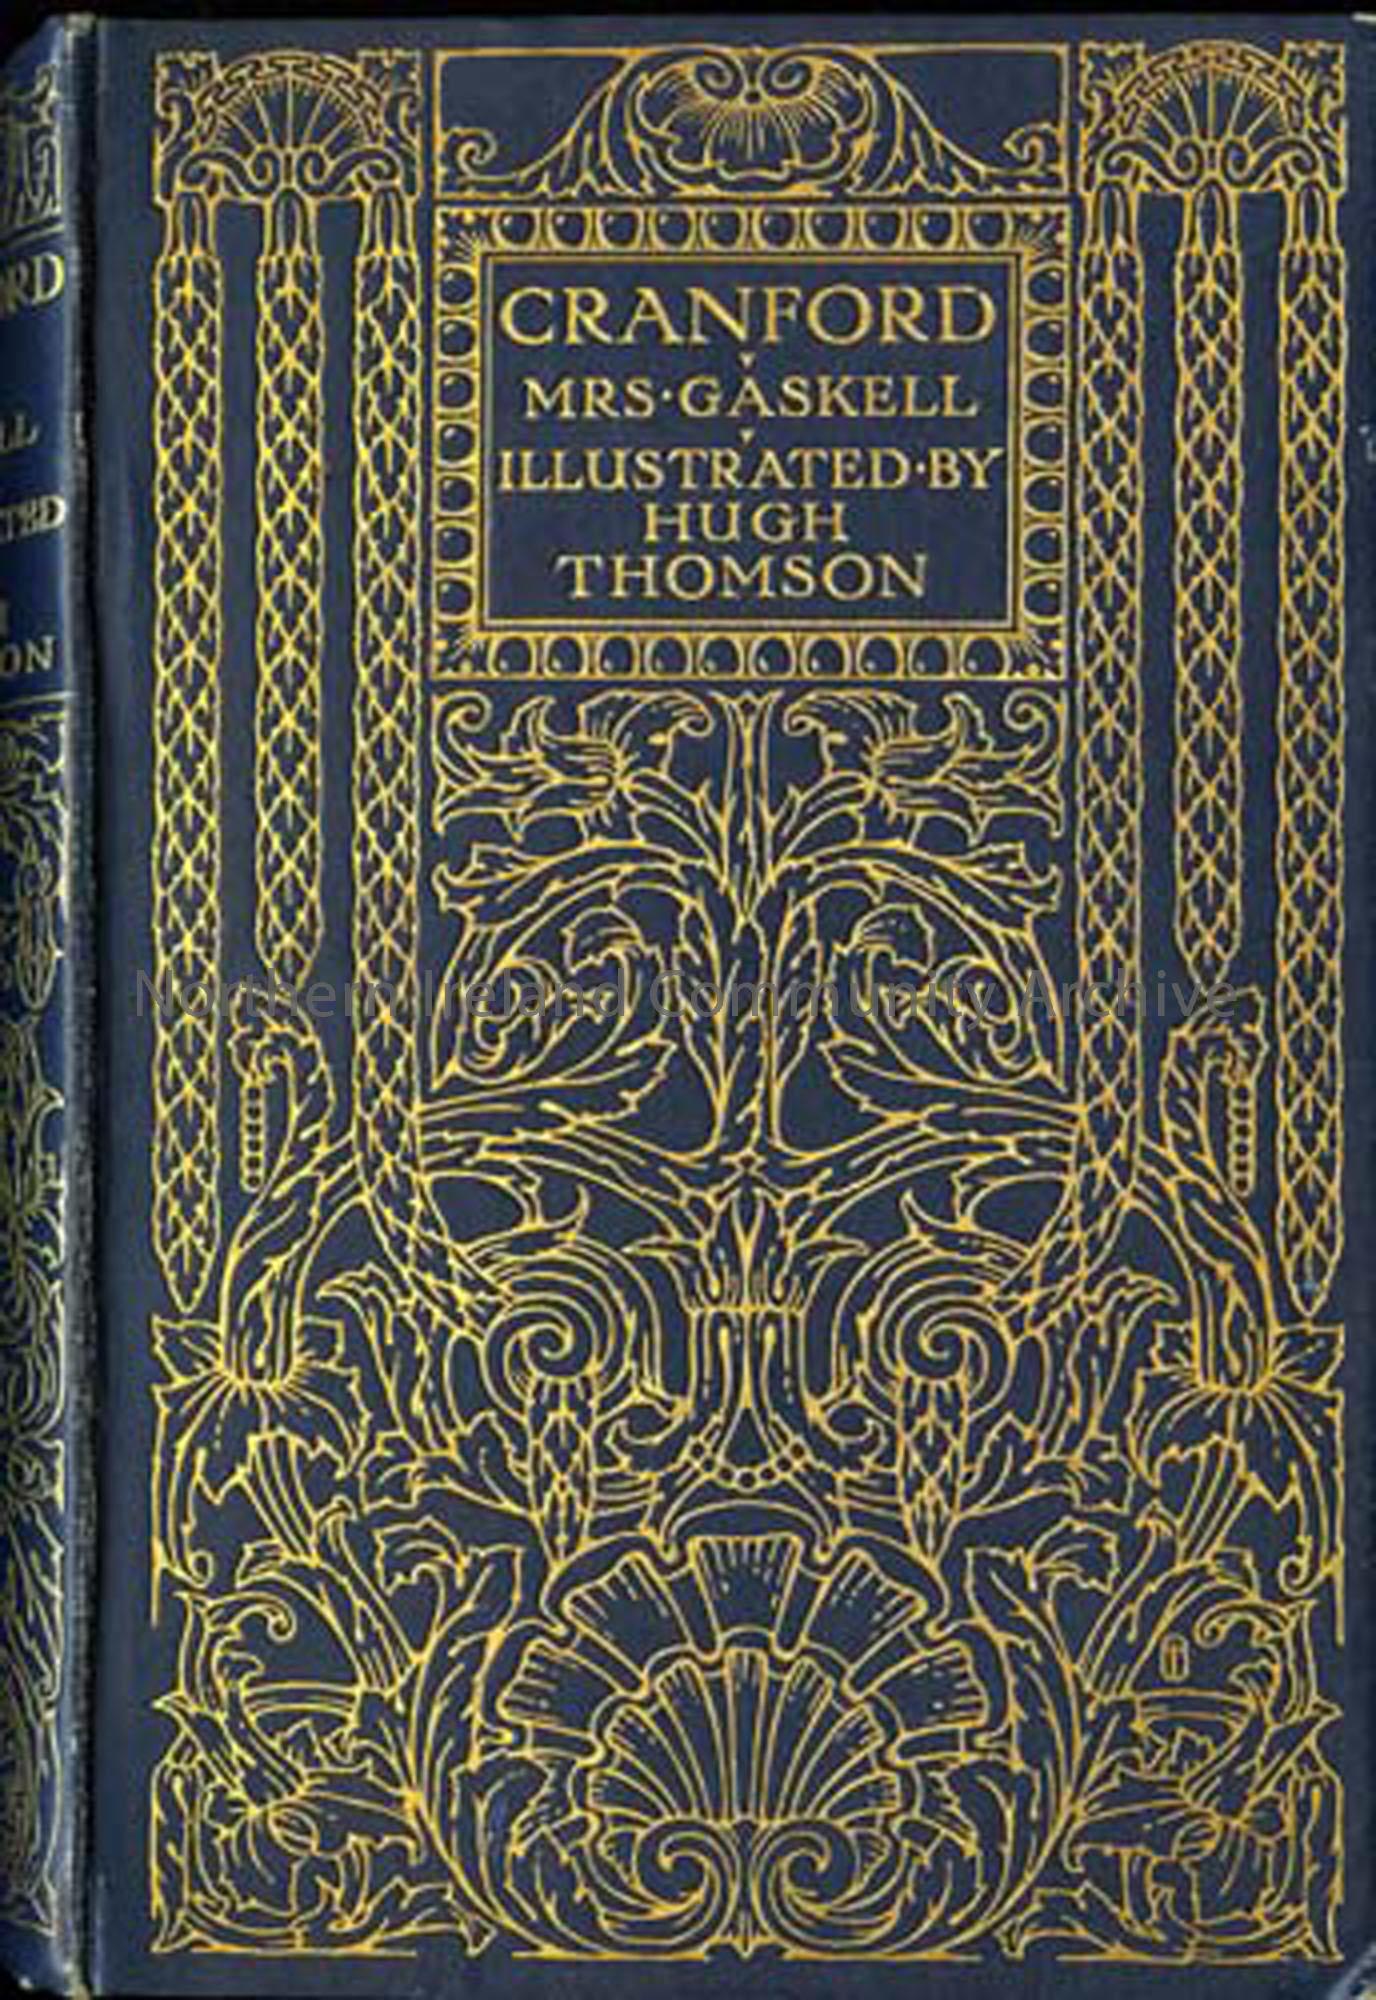 Cranford by Mrs. Gaskell  illustrated by Hugh Thomson  (6293)